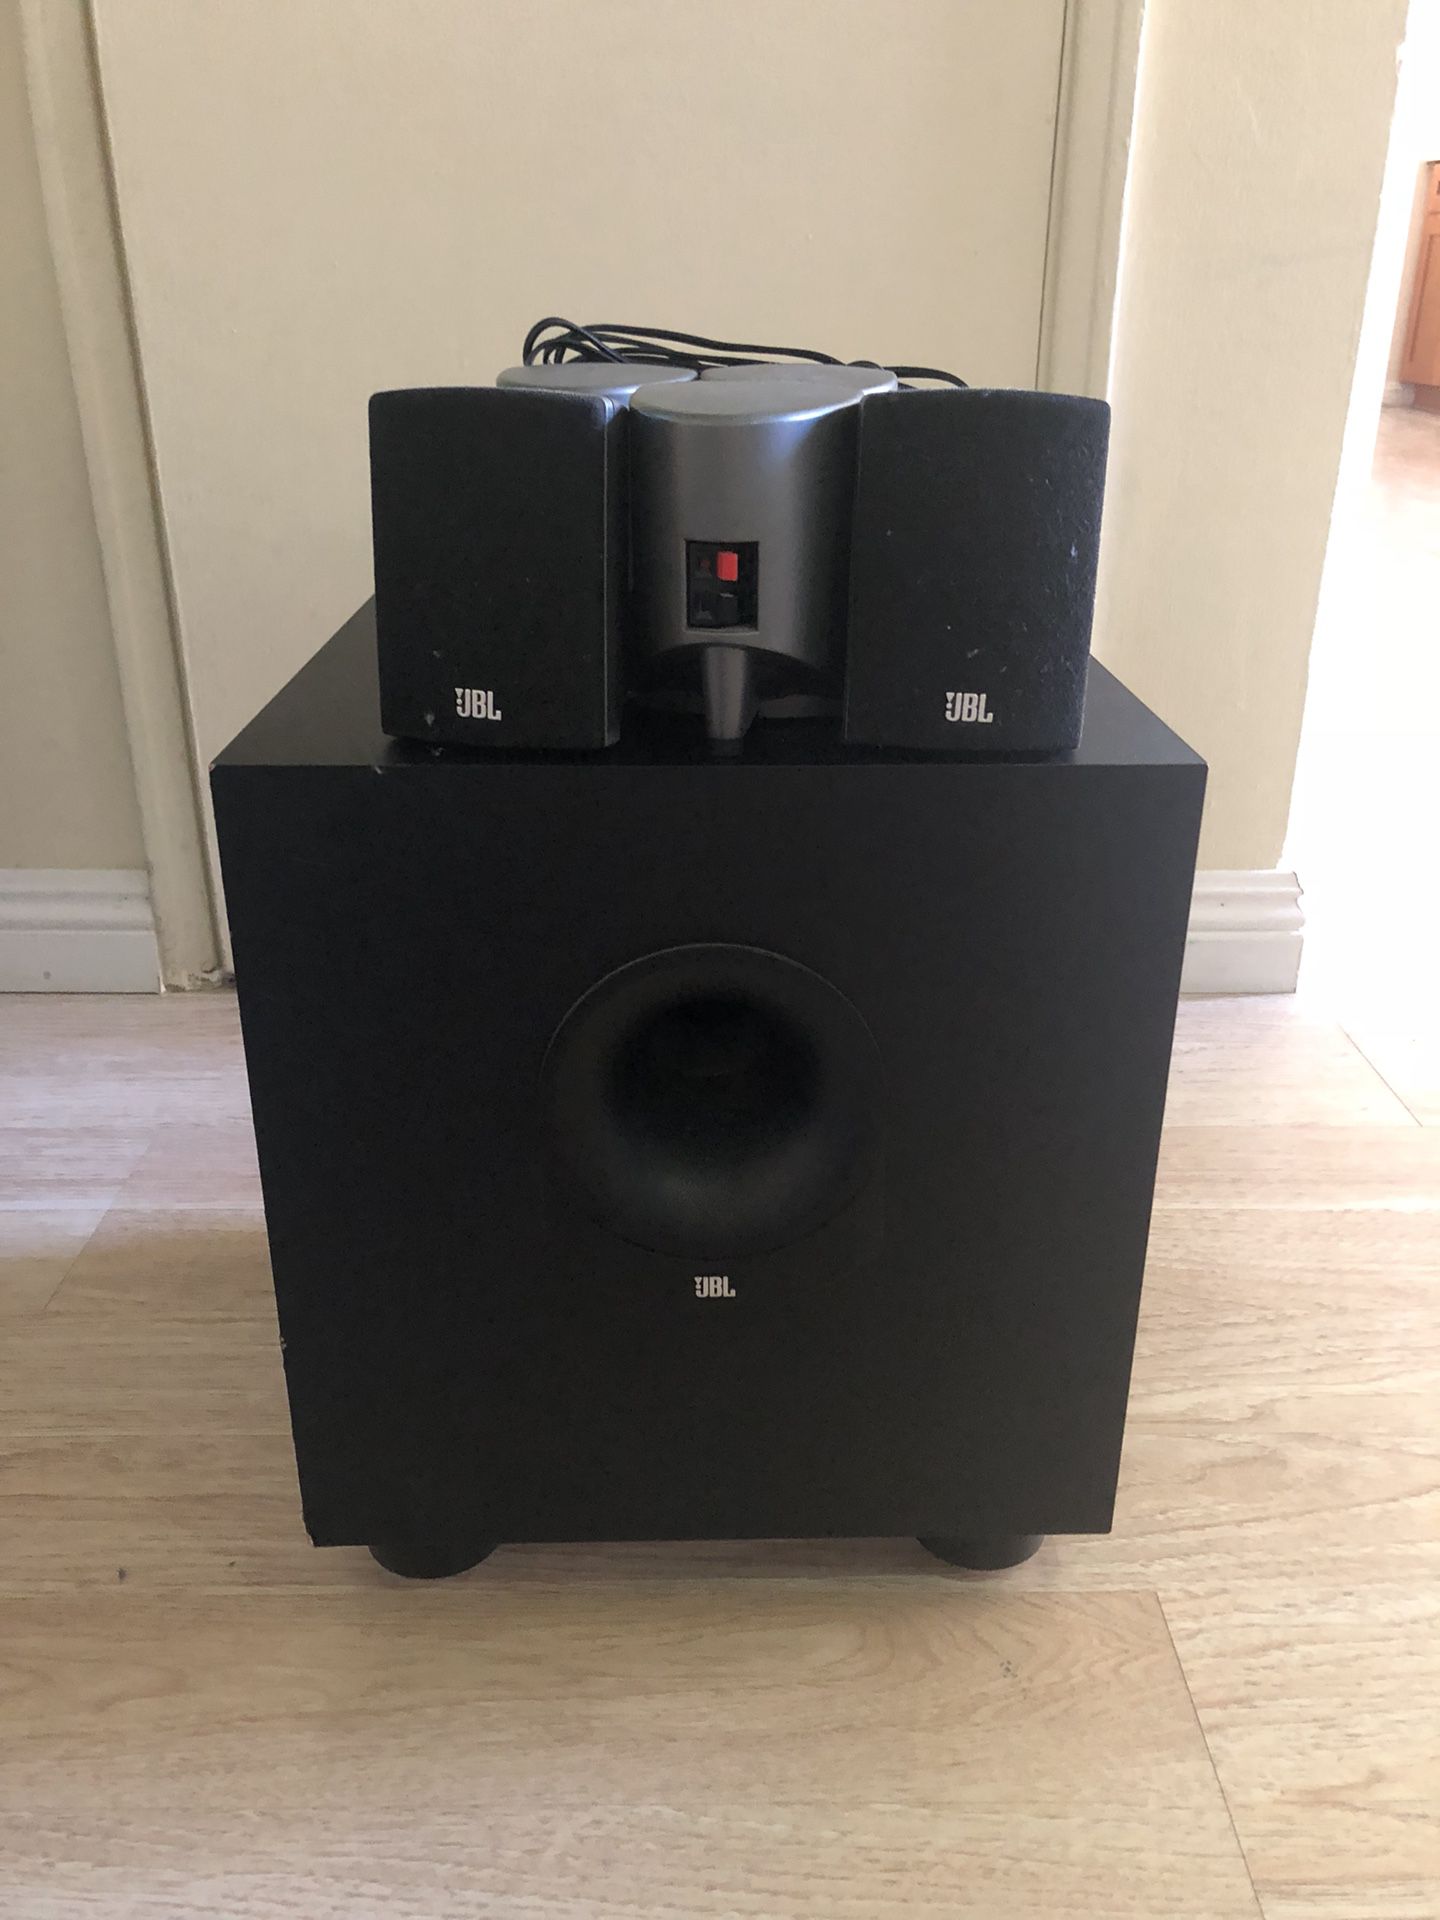 Buy the JBL Model 135 Home Theater System (Set of 5 - Subwoofer